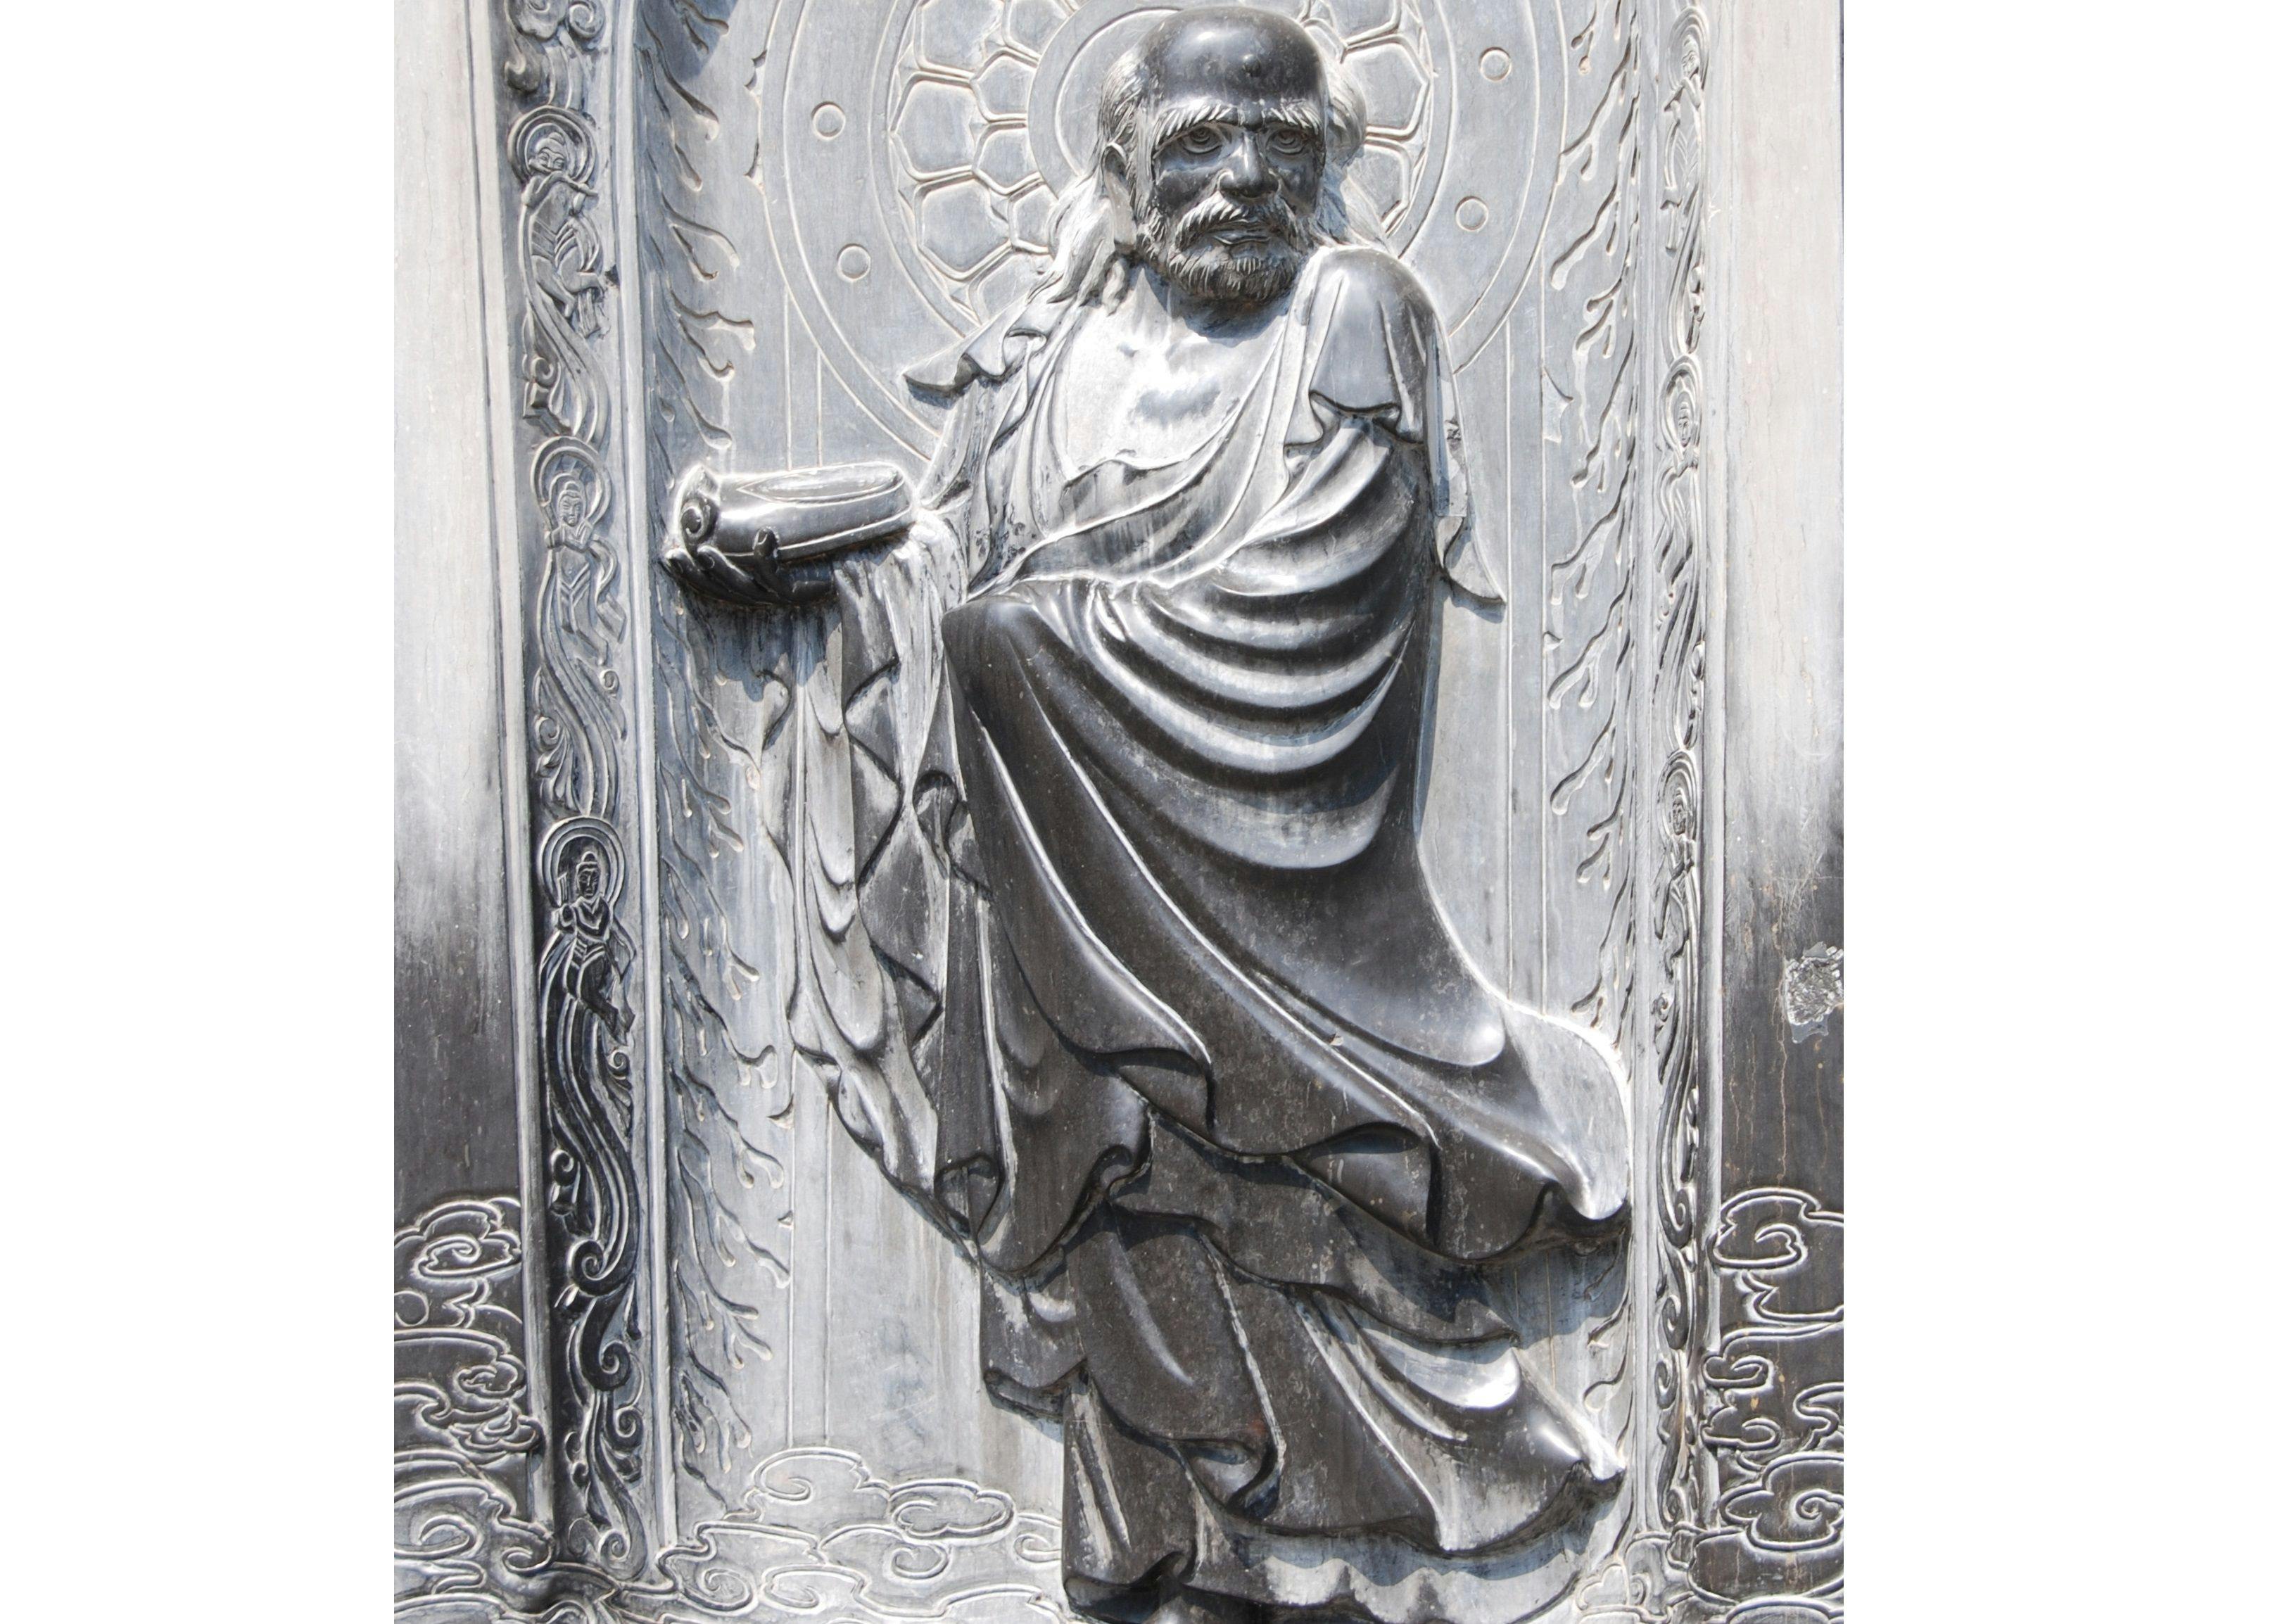 Relief statue of Bodhidharma at Shaolin